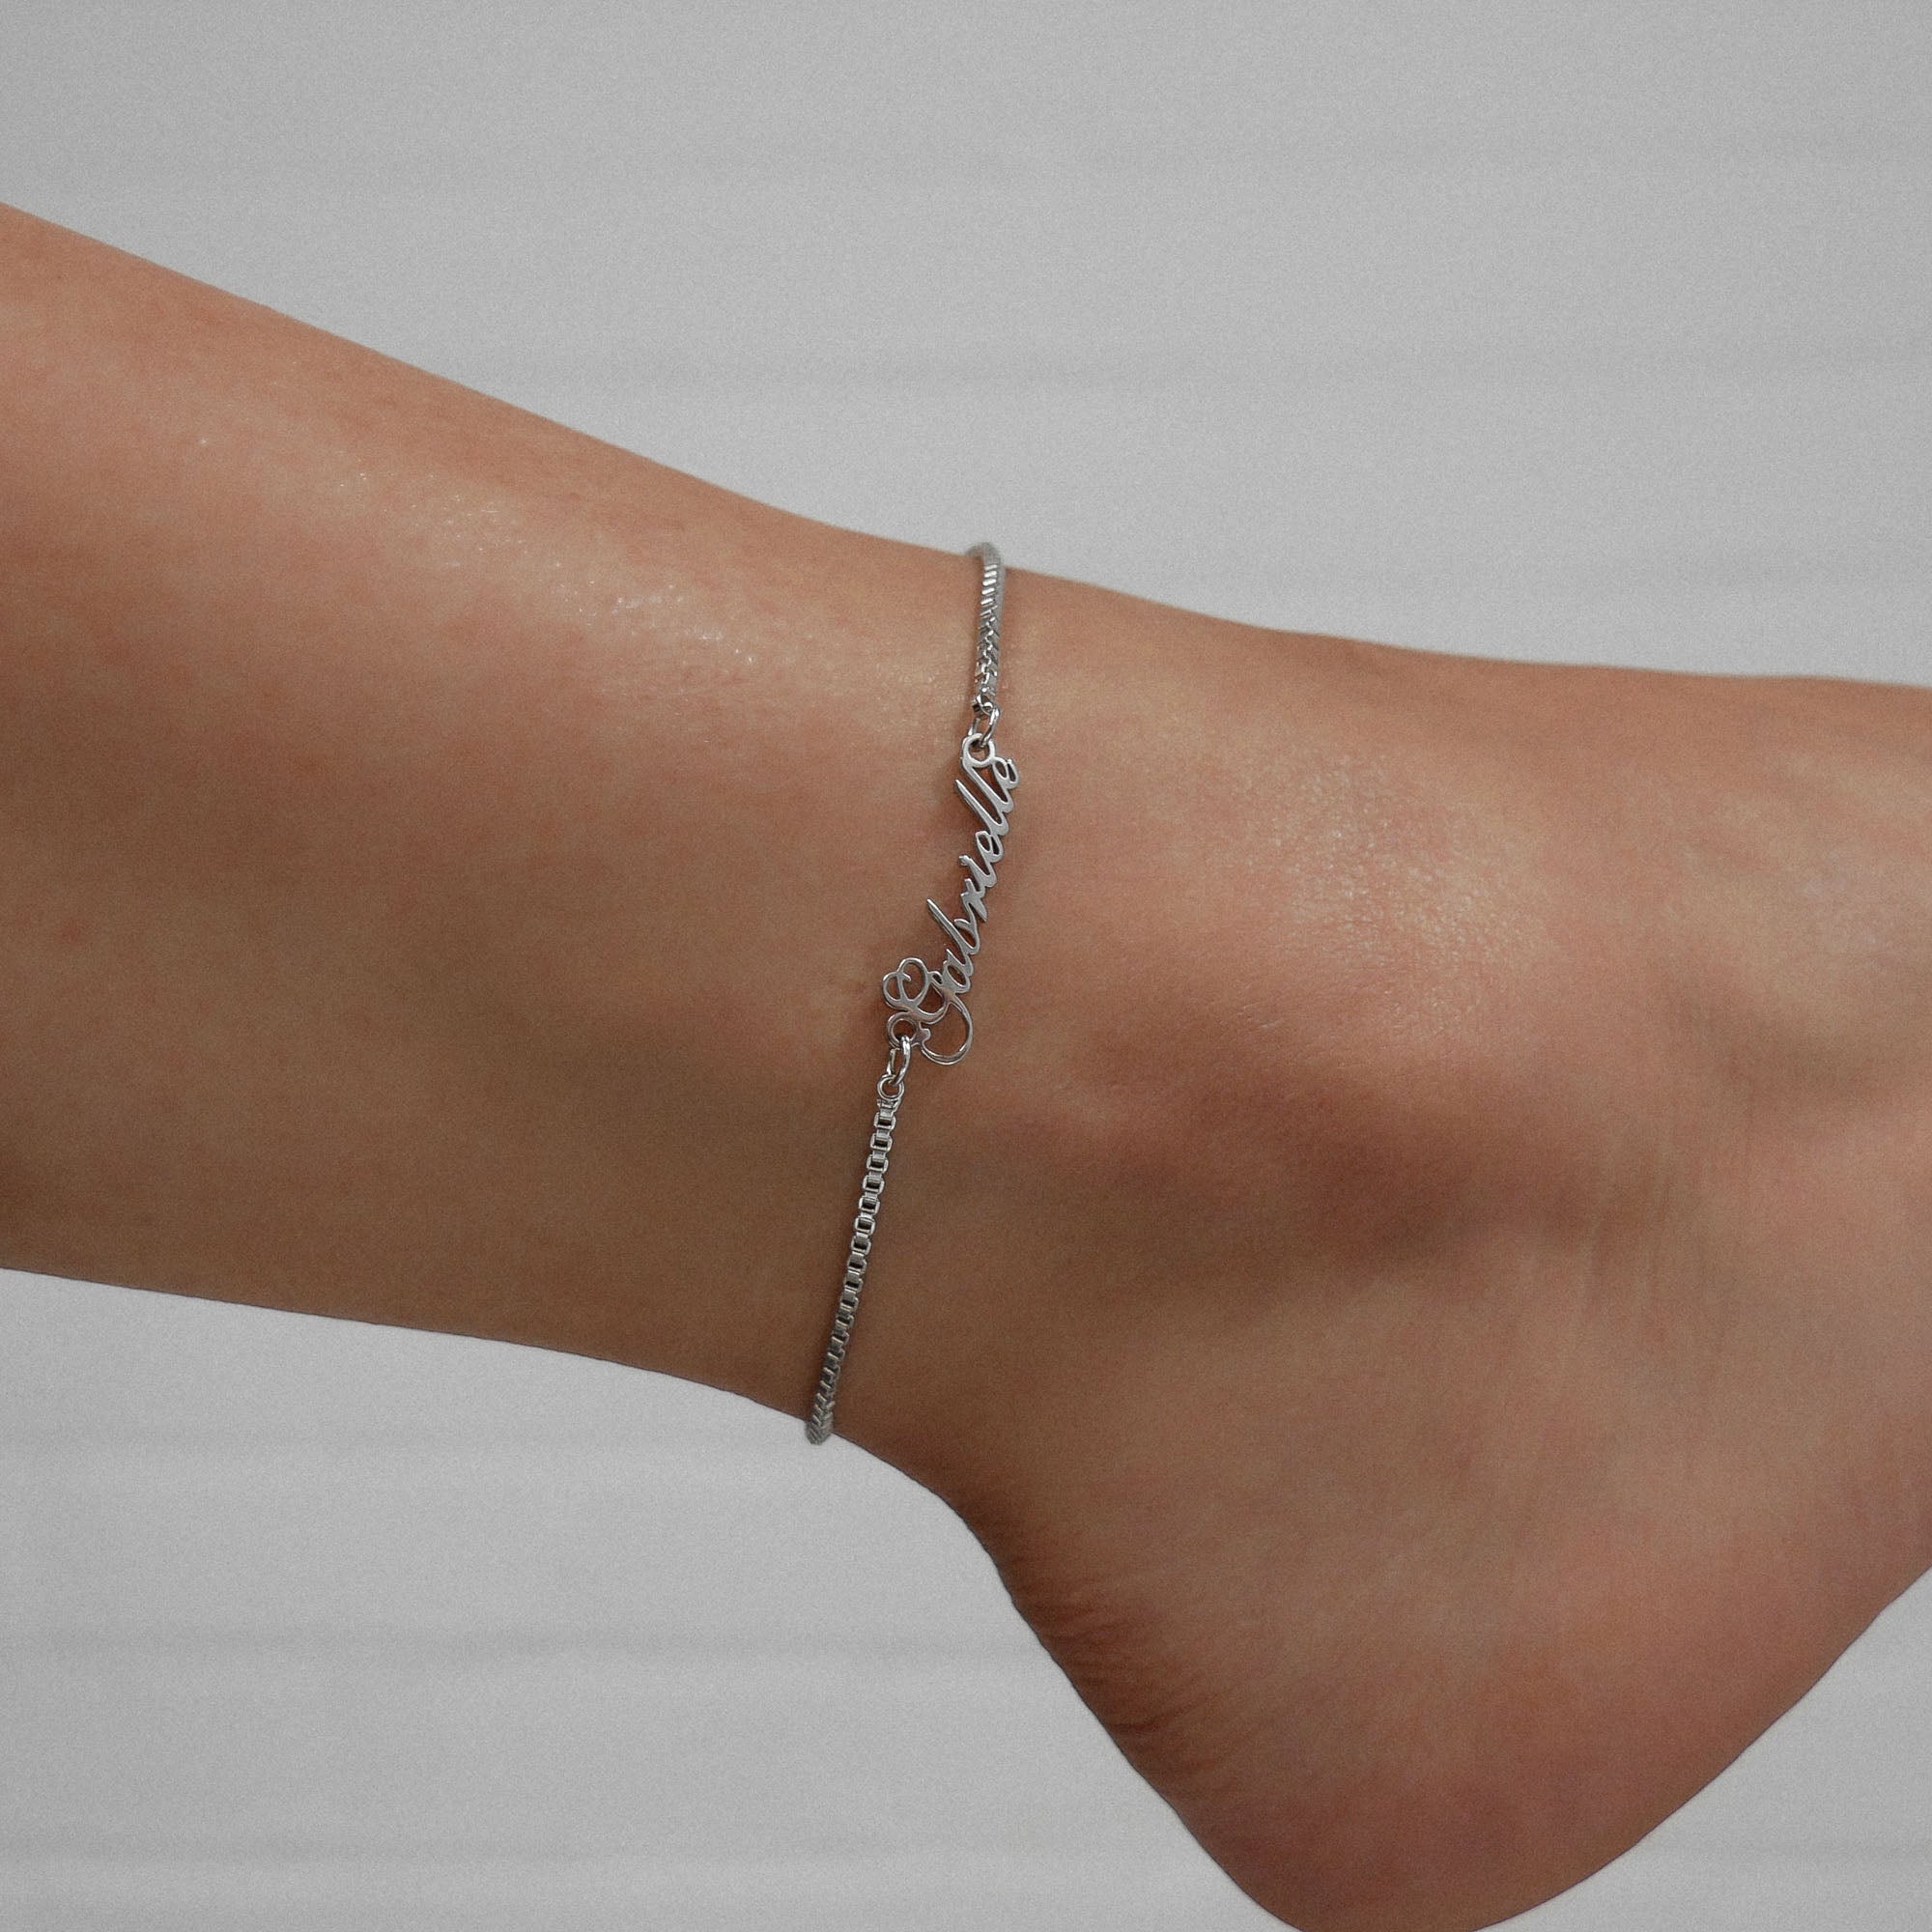 Silver custom name anklet displayed on an ankle